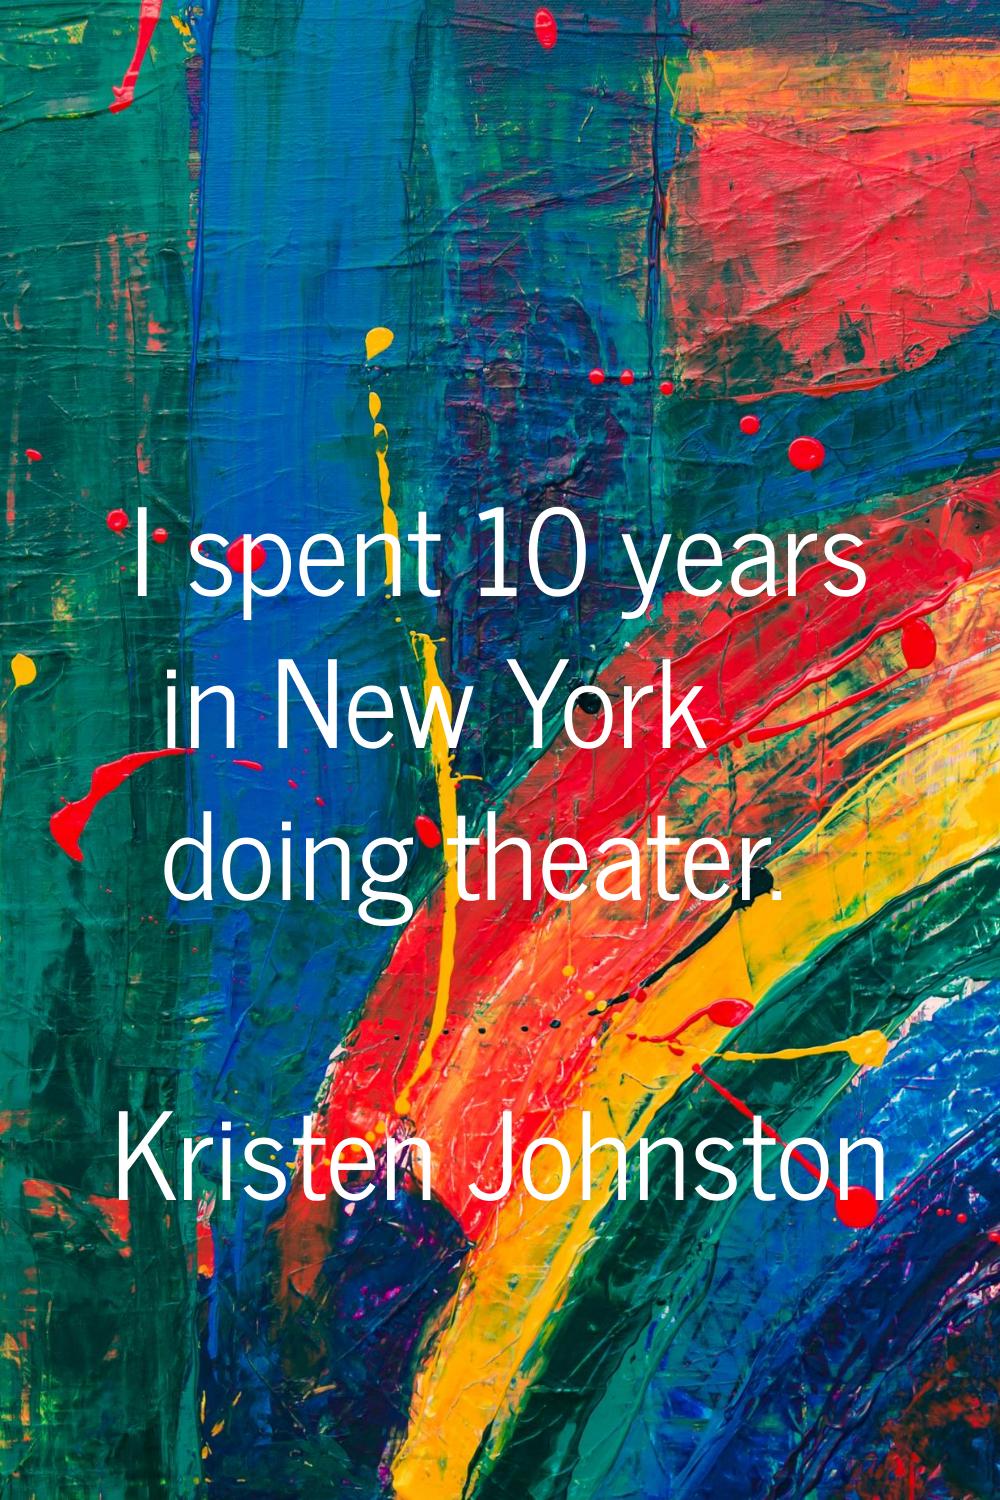 I spent 10 years in New York doing theater.